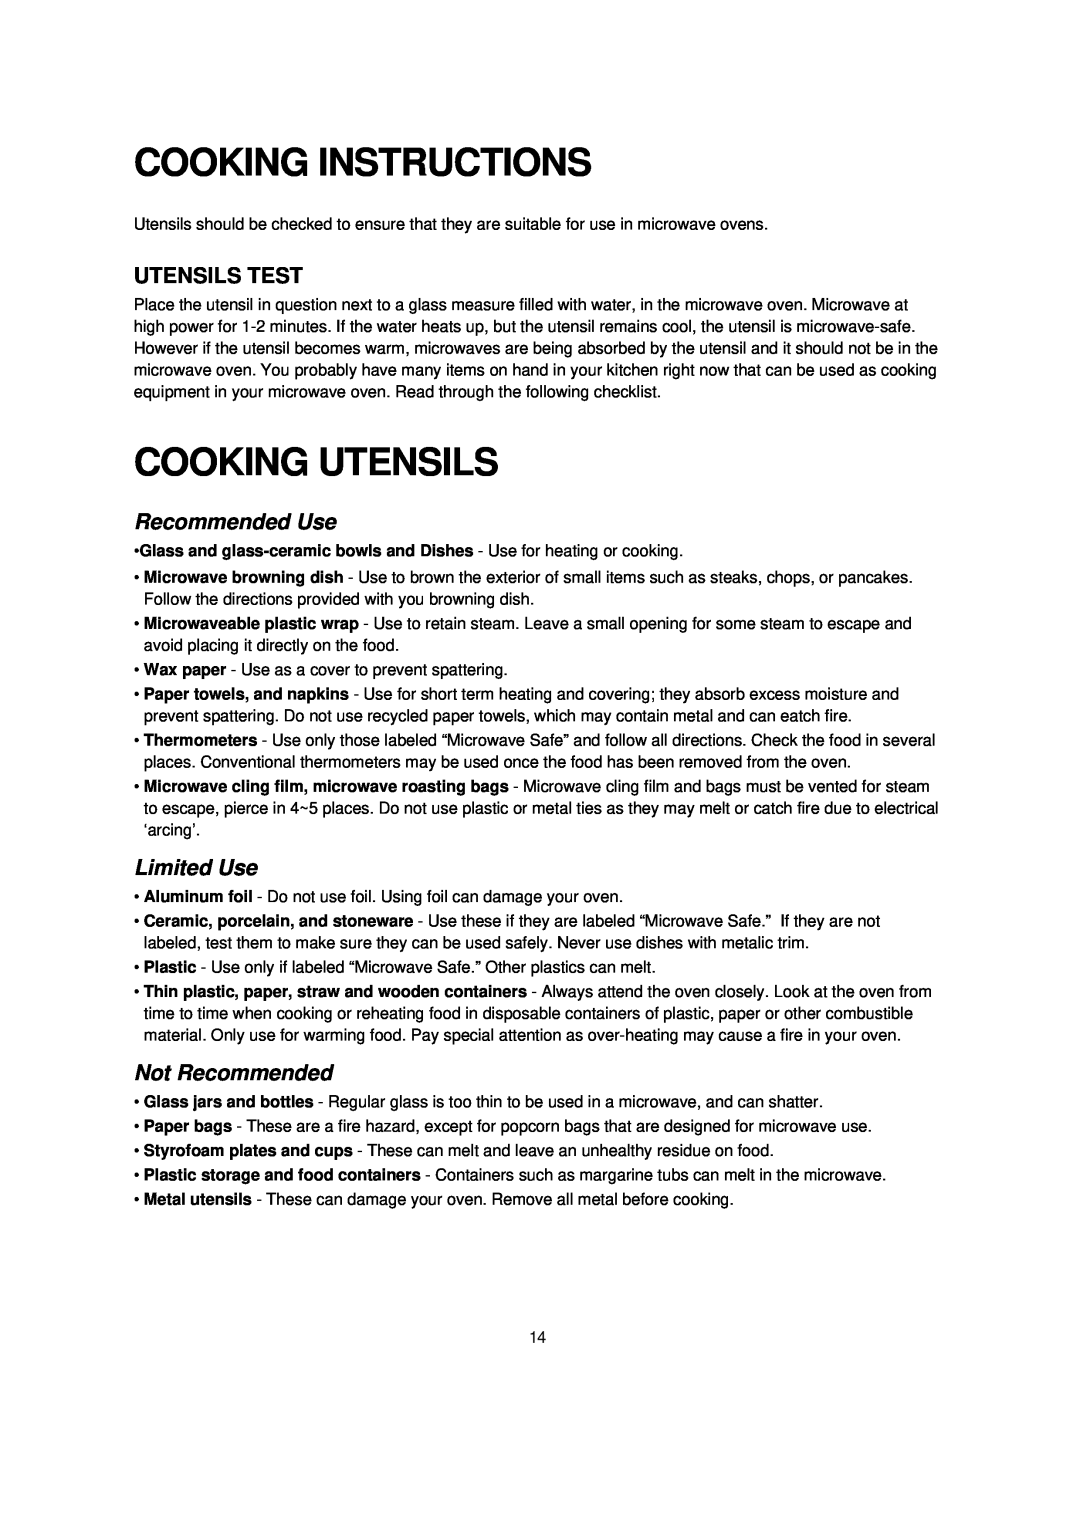 Turbo Air TMW-1100E manual Cooking Instructions, Cooking Utensils, Recommended Use, Limited Use, Not Recommended 